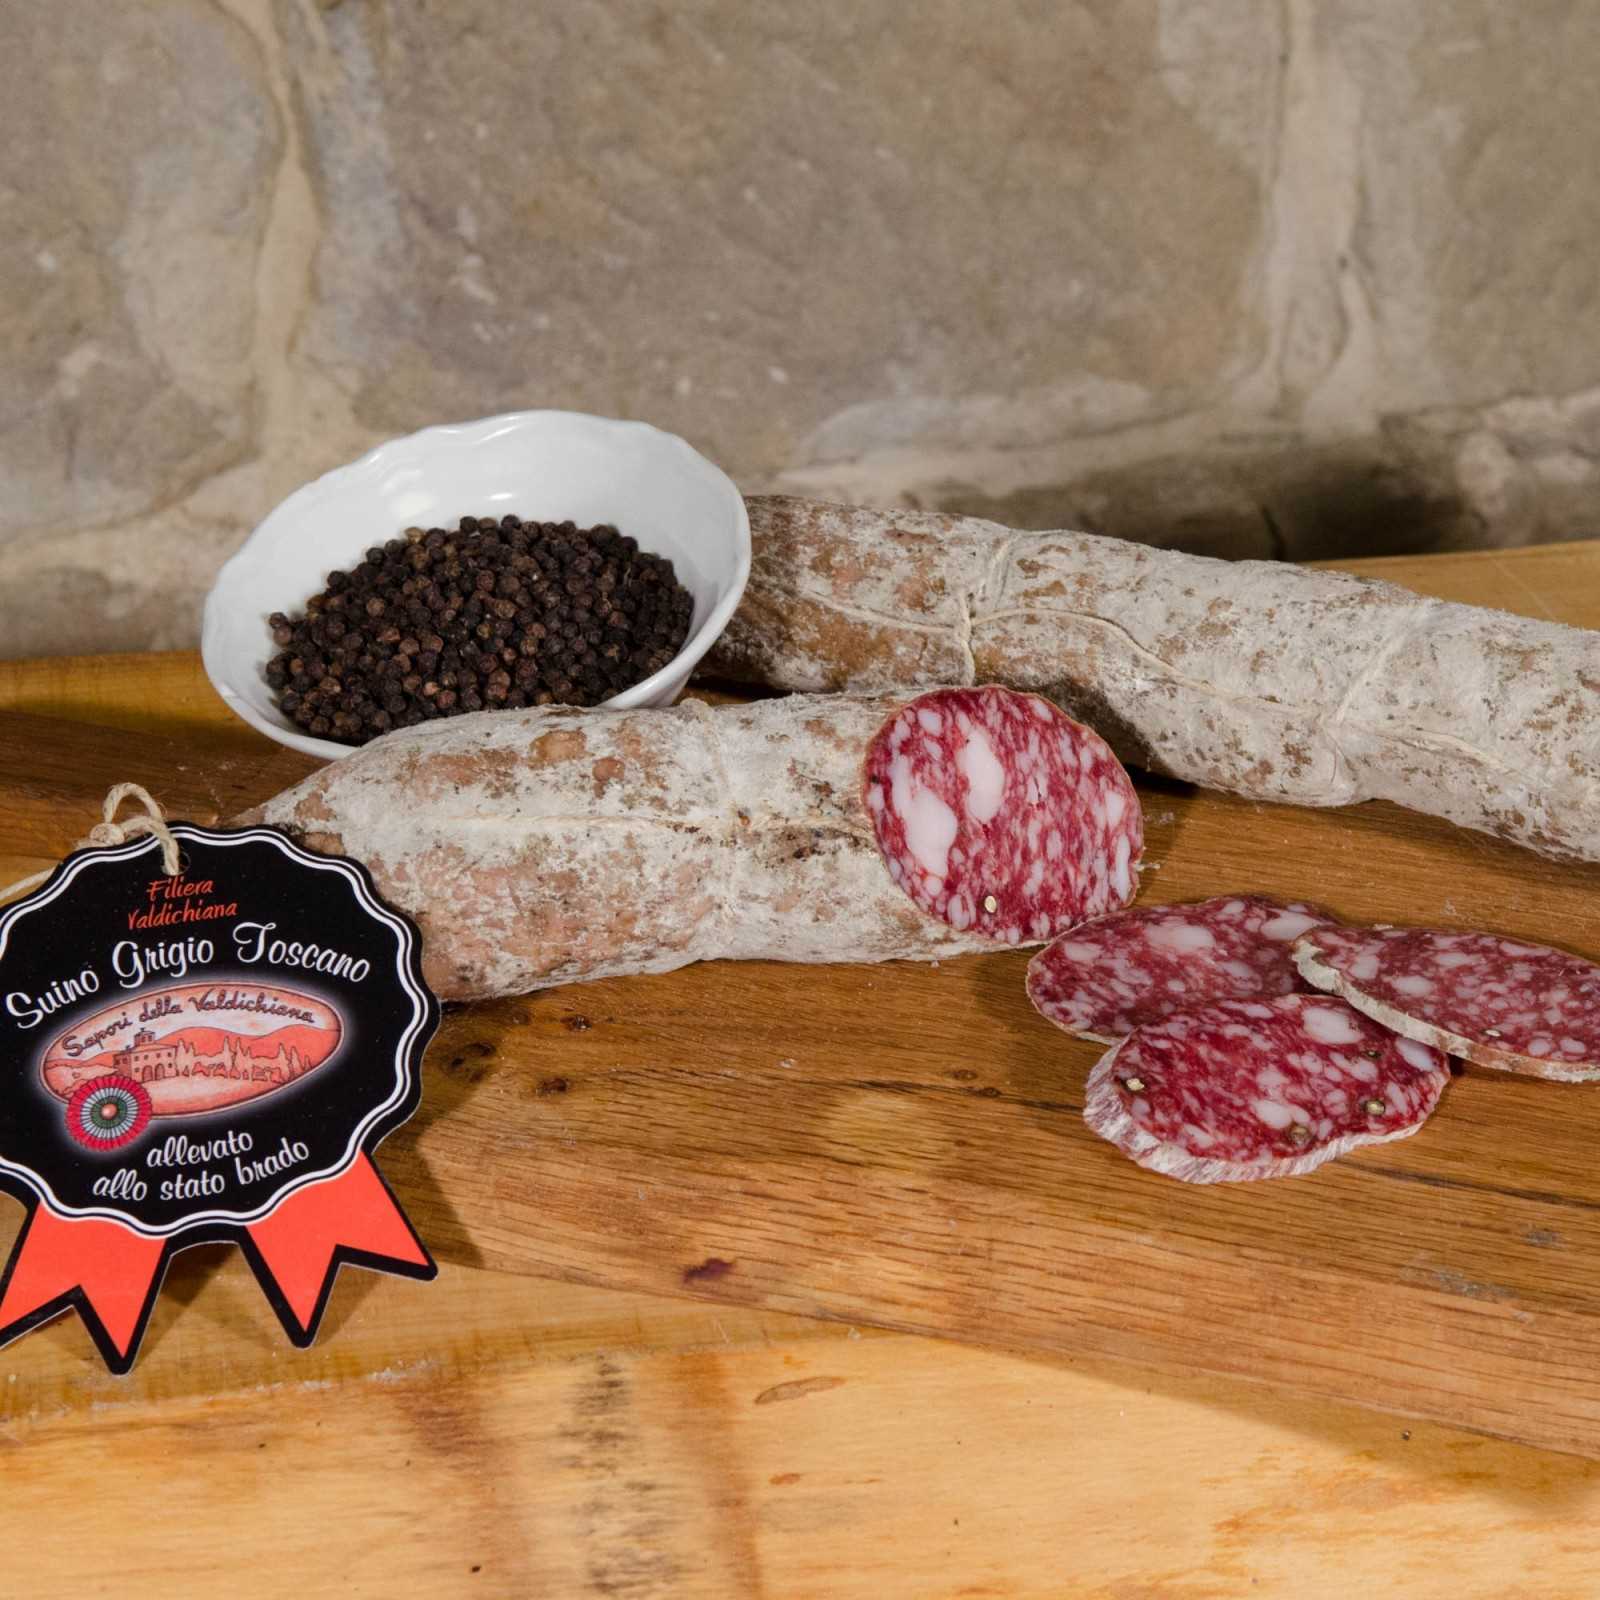 Tuscan Salami - Filiera Valdichiana is a salami made with pure pork from pigs reared in the wild in Tuscany. The coarse grinding of the meat ensures that the lean and fat parts are clearly distinguishable, with the latter being a bright white color. On the palate the hints of aromatic herbs and spices stand out, in particular black pepper in grains.